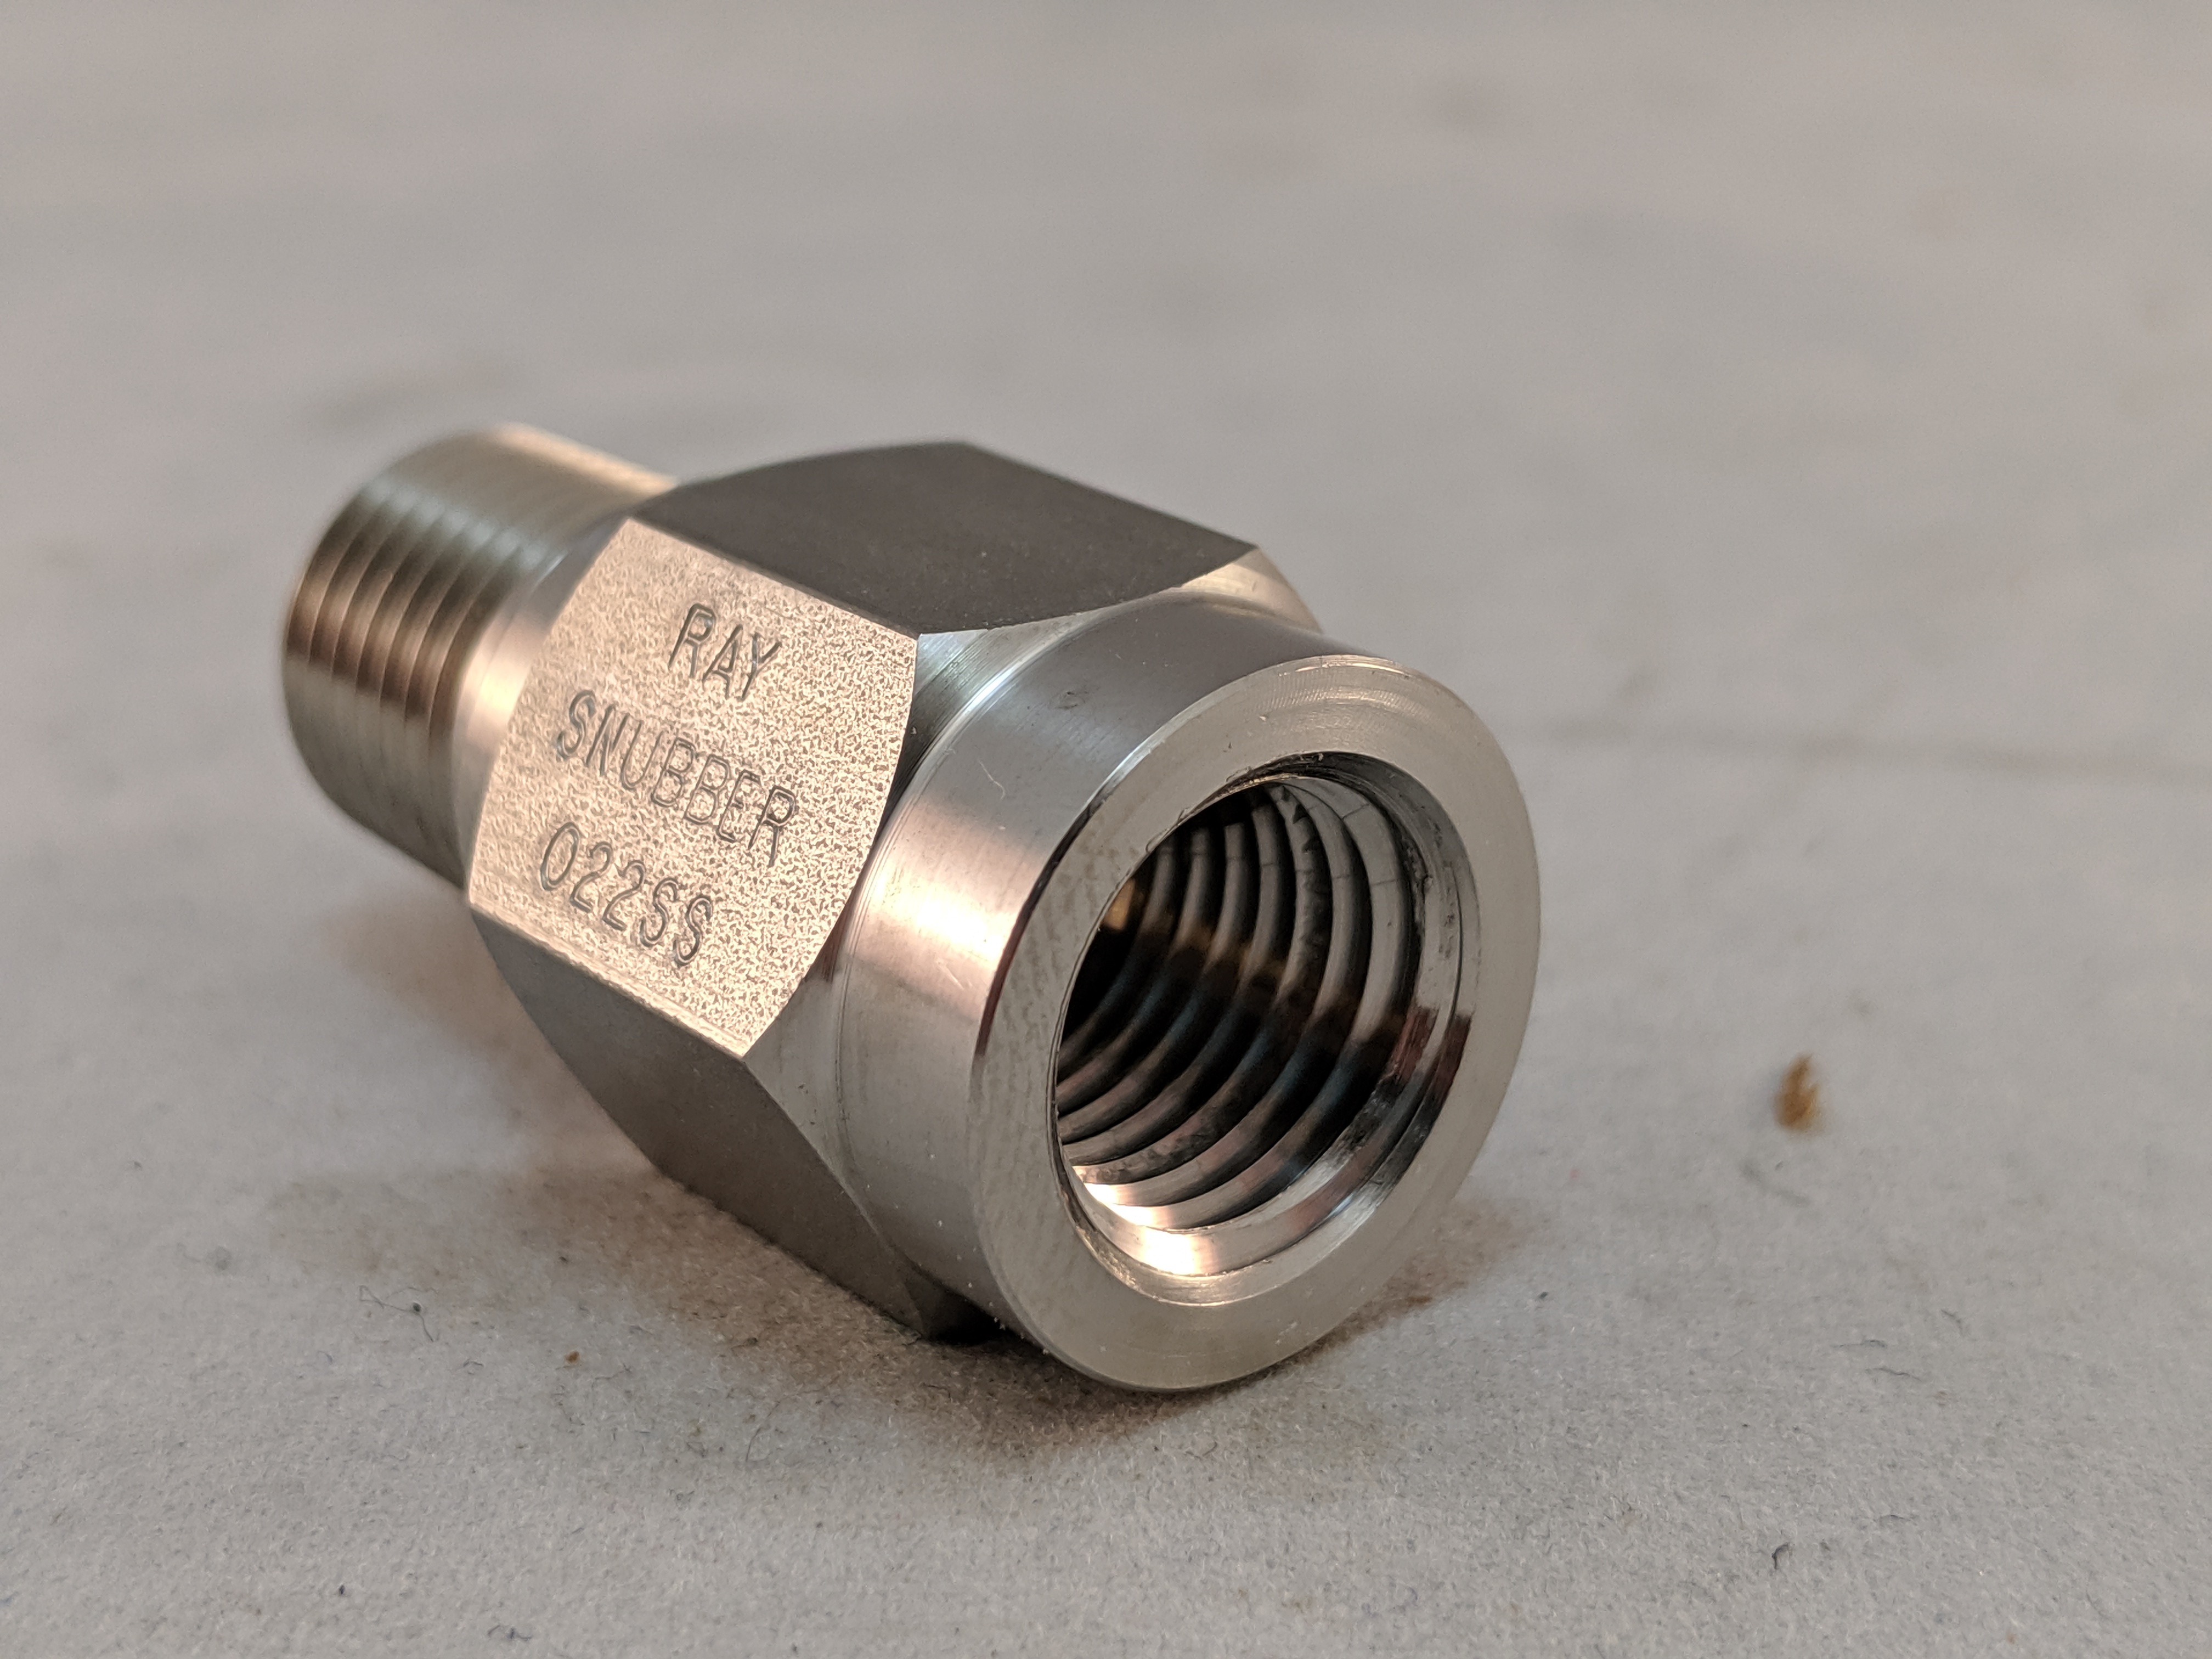 RAY SNUBBER 1/4" NPT 316SS 15,000 PSI MAX